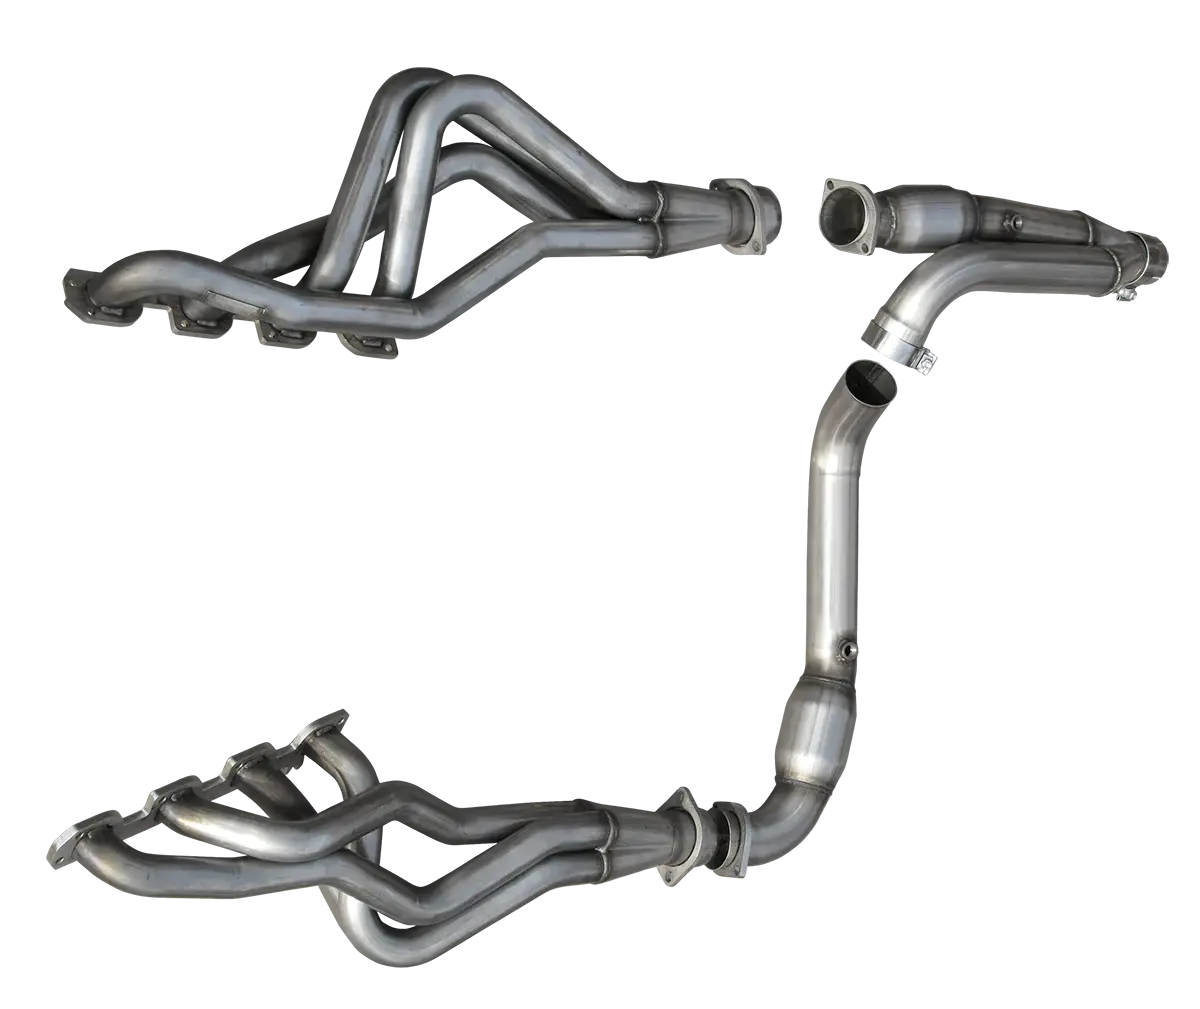 American Racing Headers - ARH Dodge Ram 1500 2006-2008 1-3/4" x 3" Long Tube Headers & Catted Connection Pipes (Square-Port) - Image 1